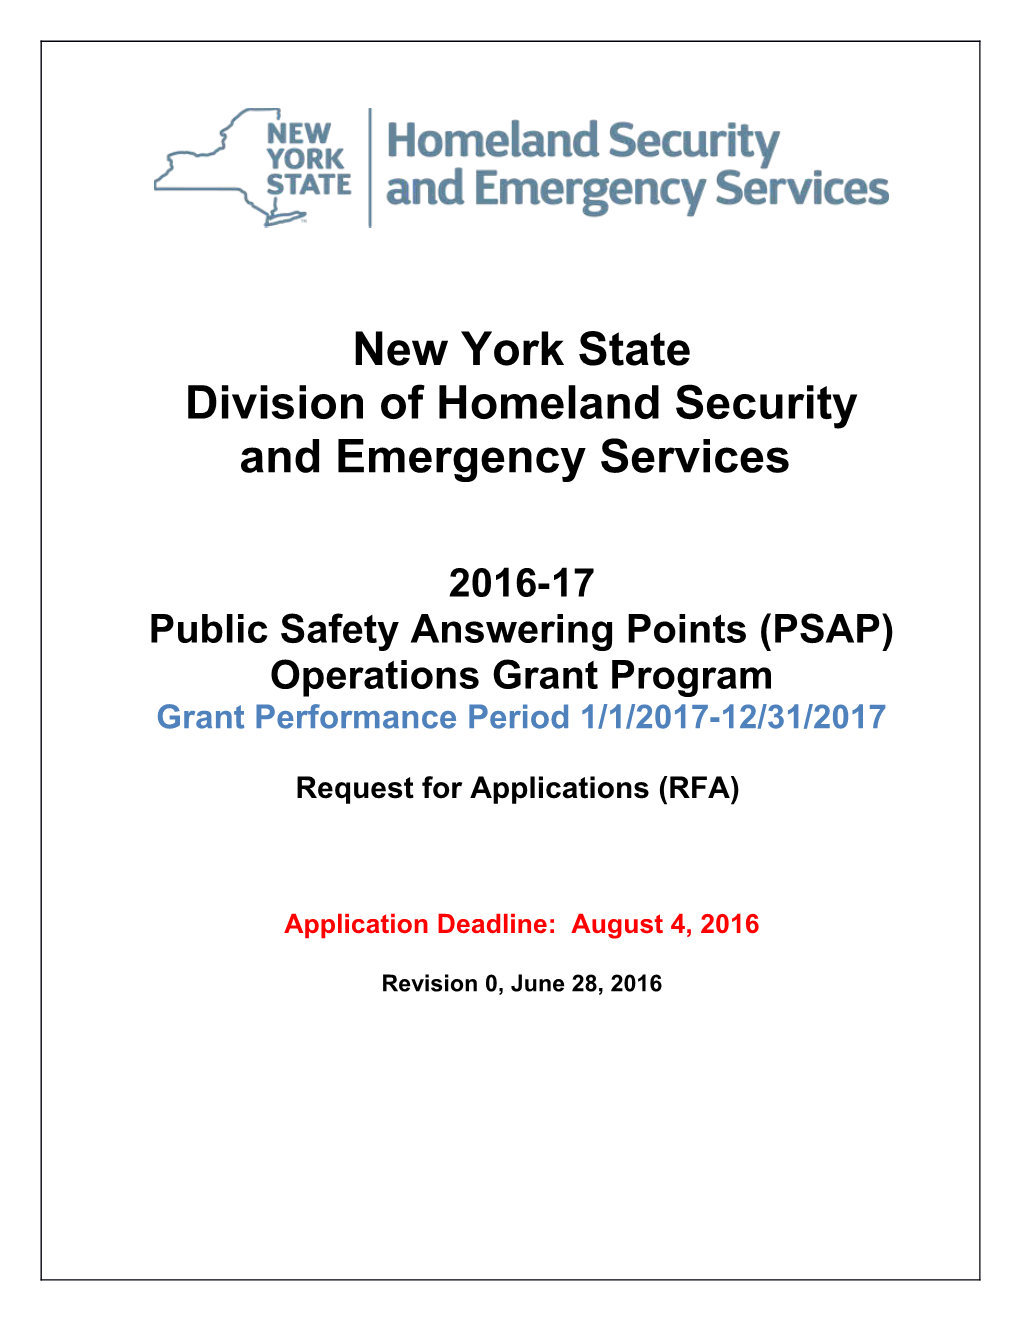 Division of Homeland Security and Emergency Services